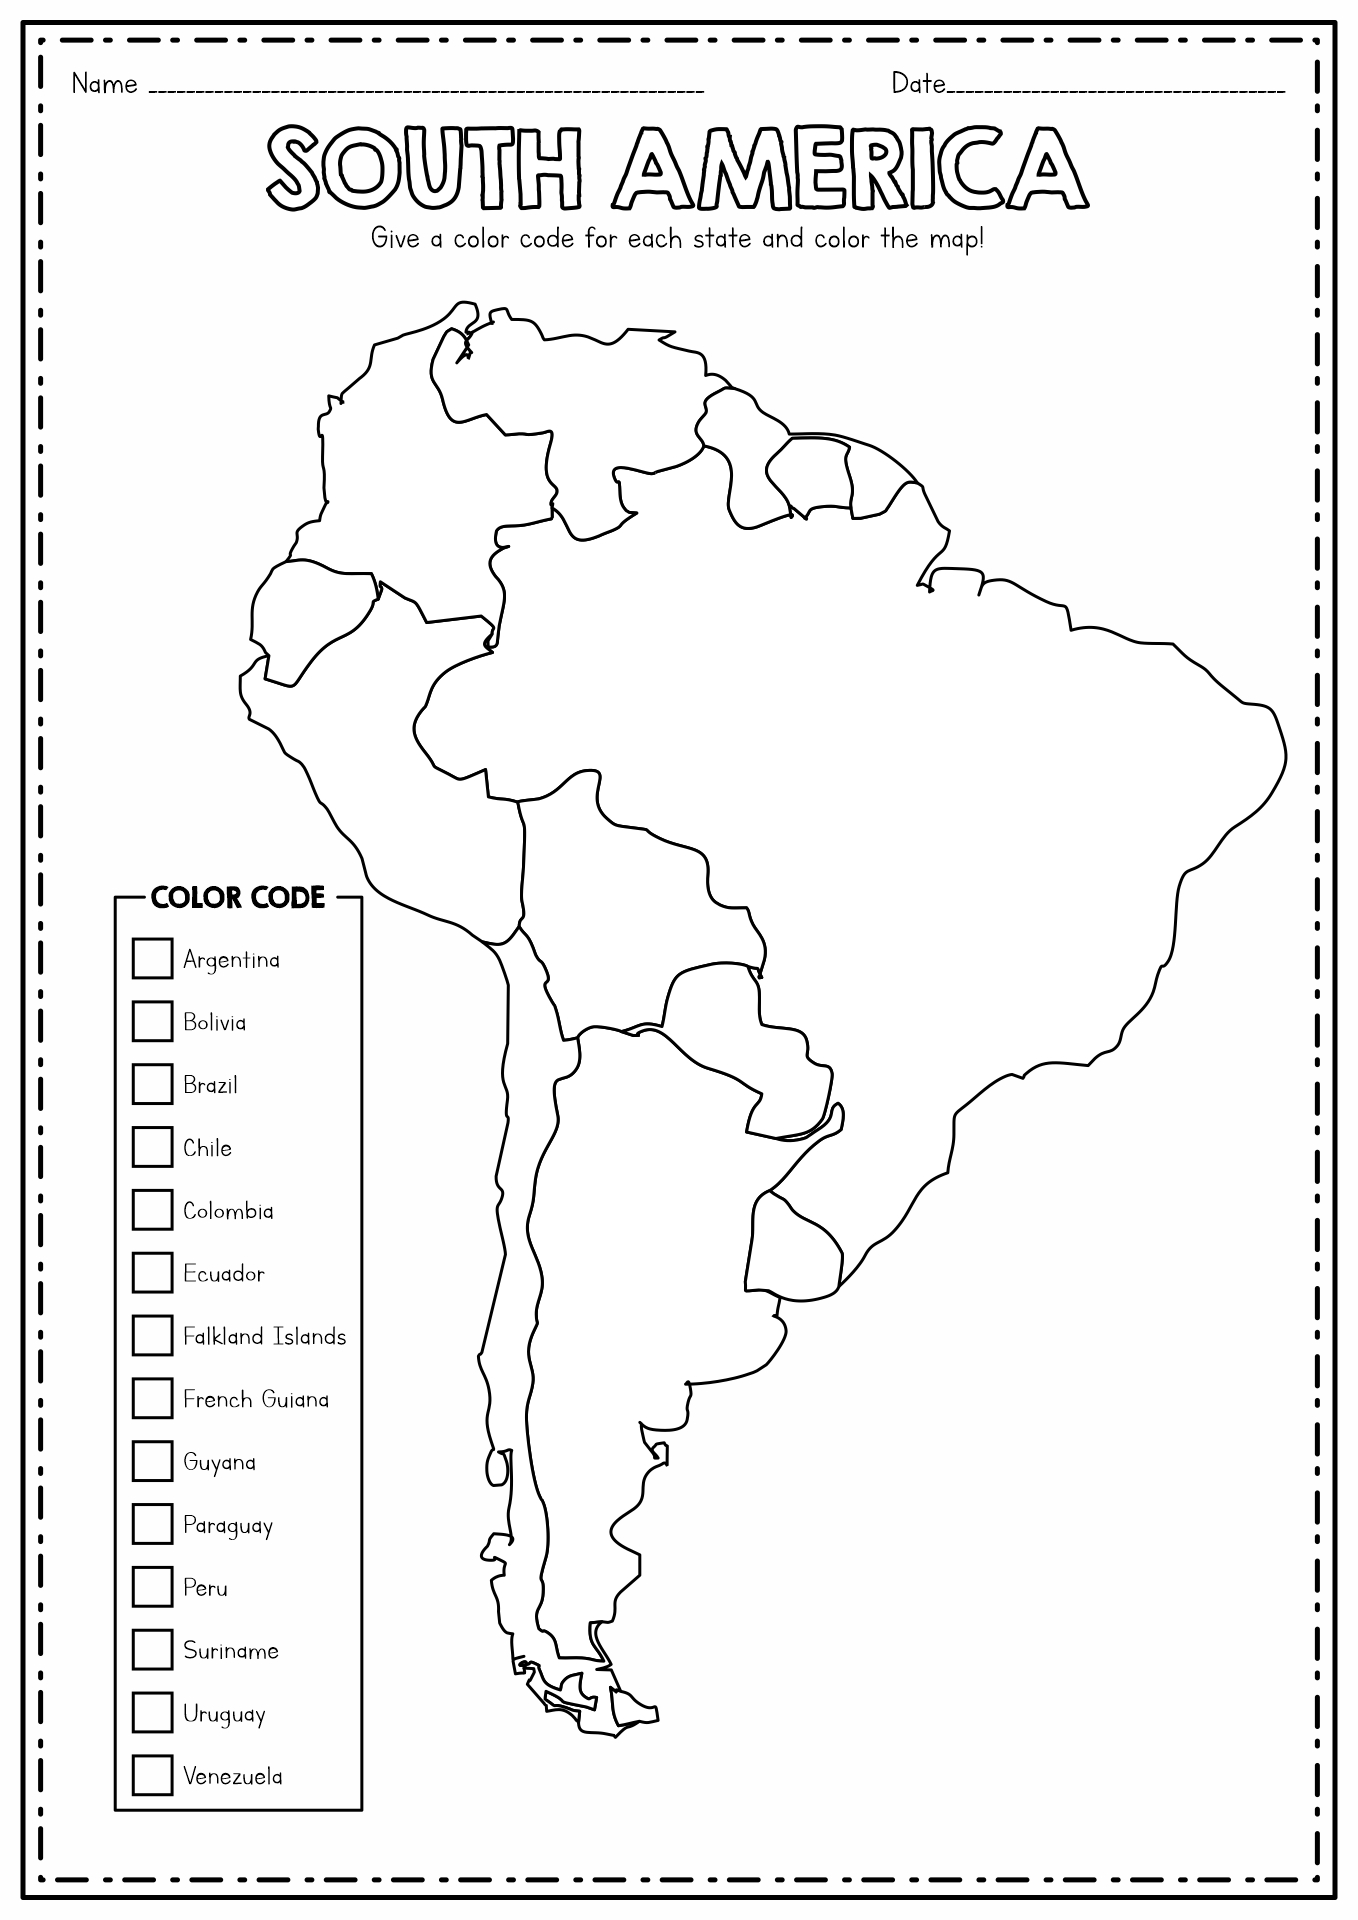 south-america-map-coloring-page